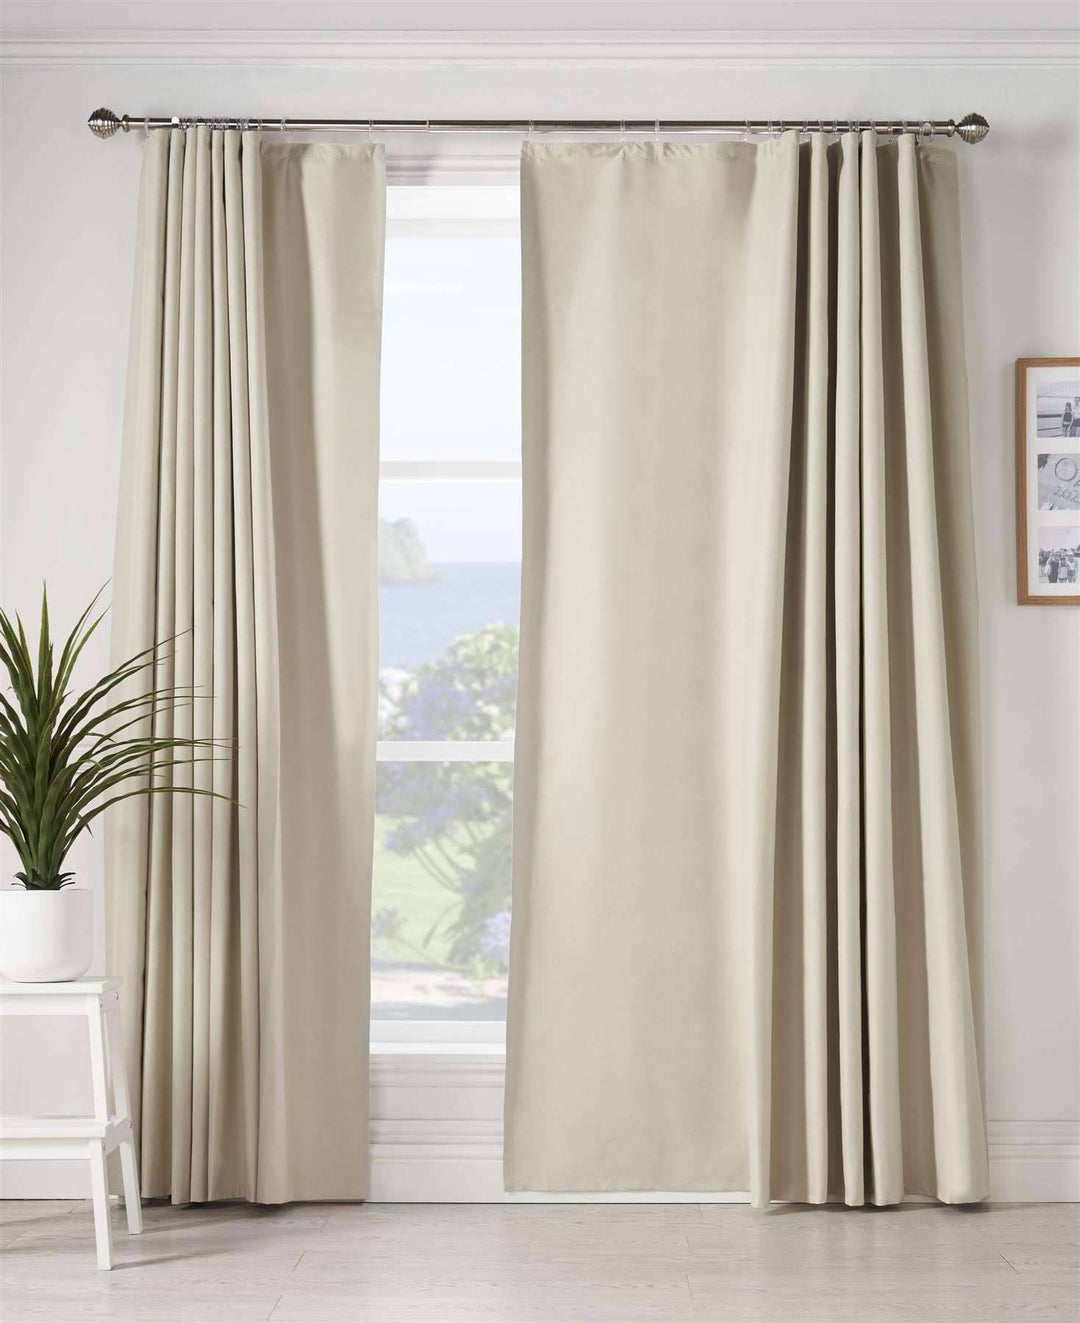 100% Blackout (Curtain Linings) - TidySpaces